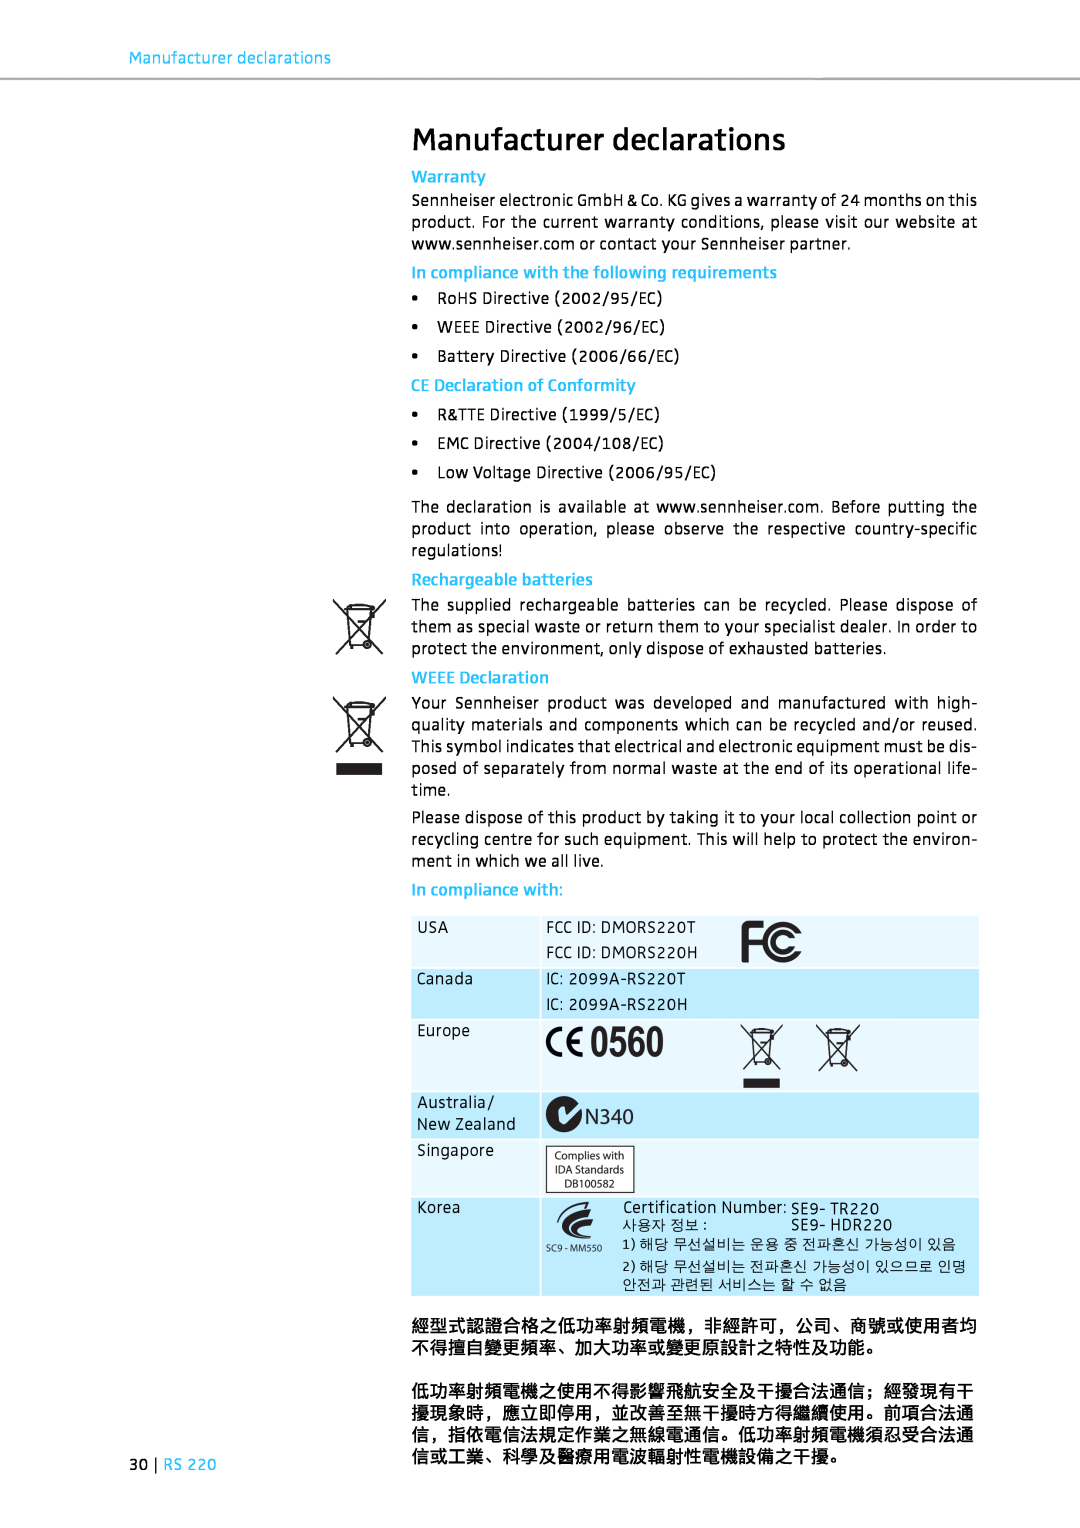 Sennheiser RS 220 Manufacturer declarations 30 RS, Warranty, In compliance with the following requirements 